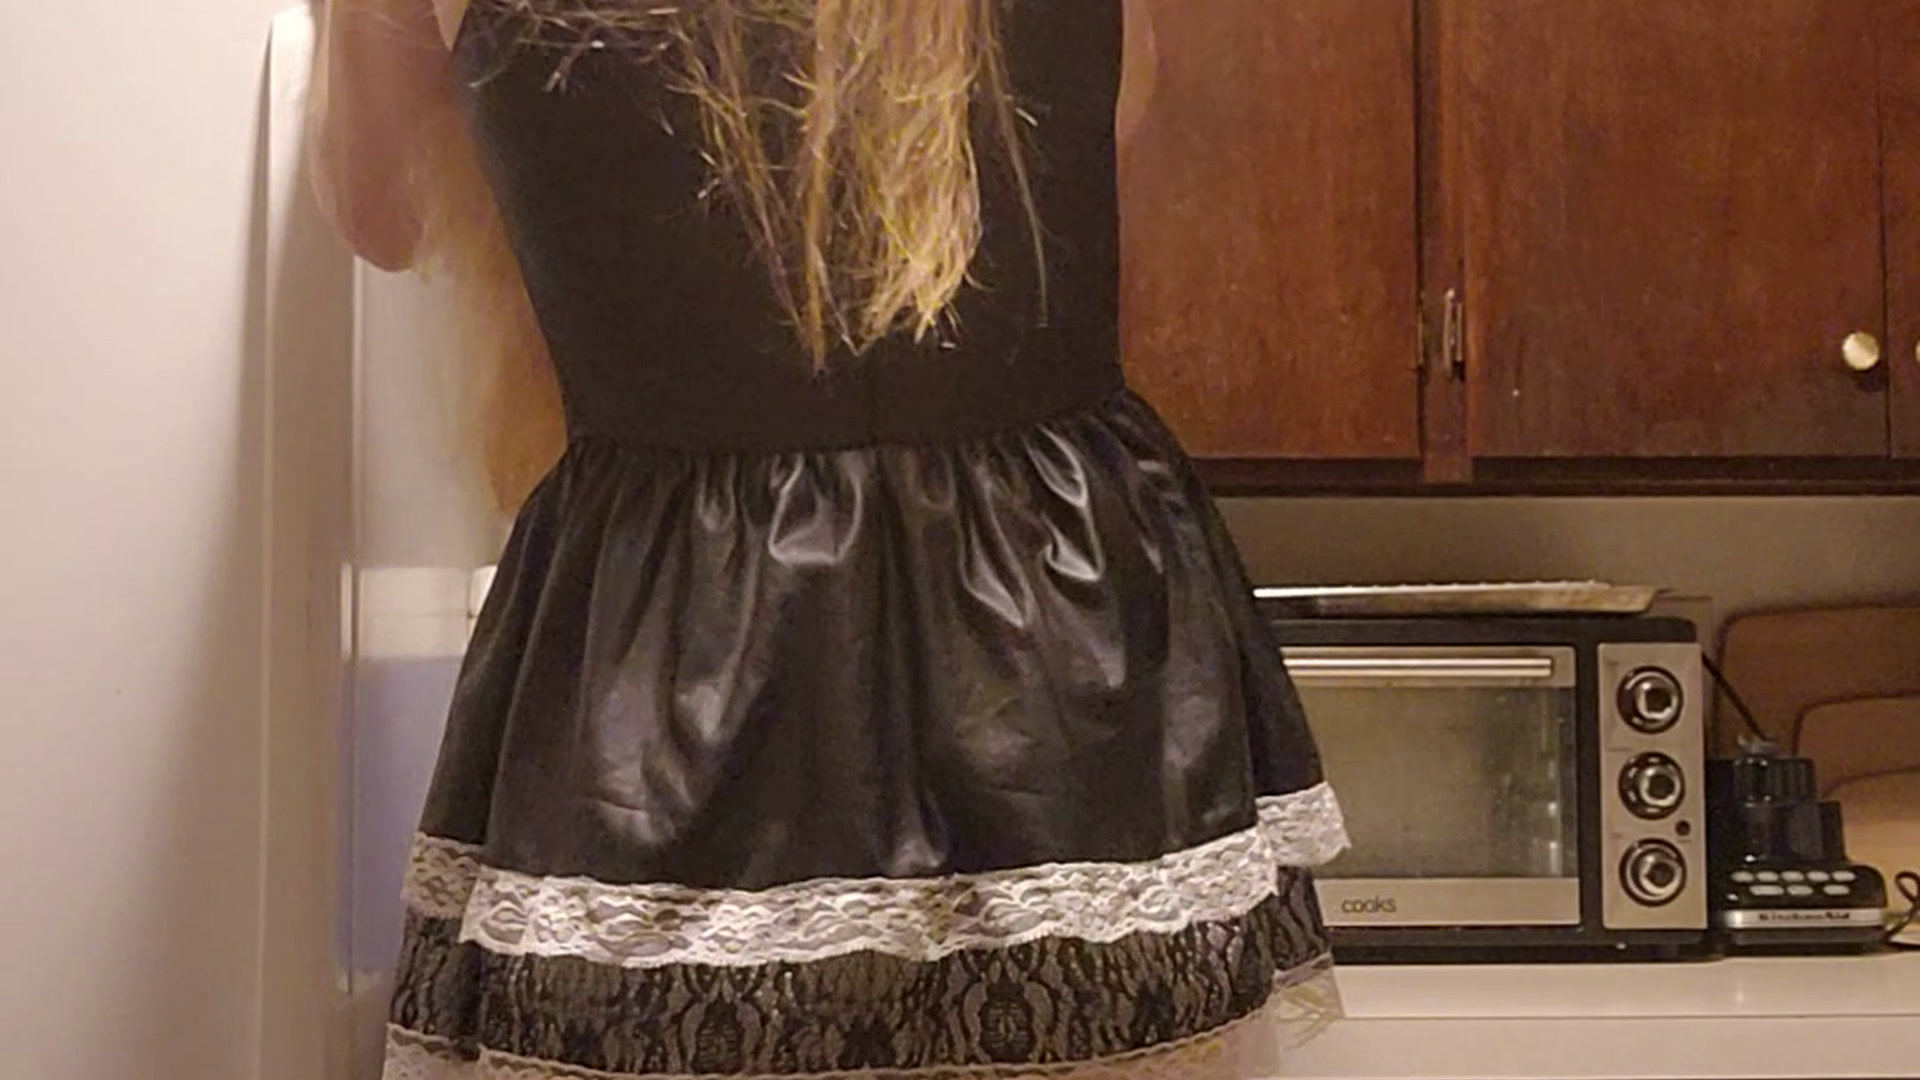 Who's your dirty little maid?